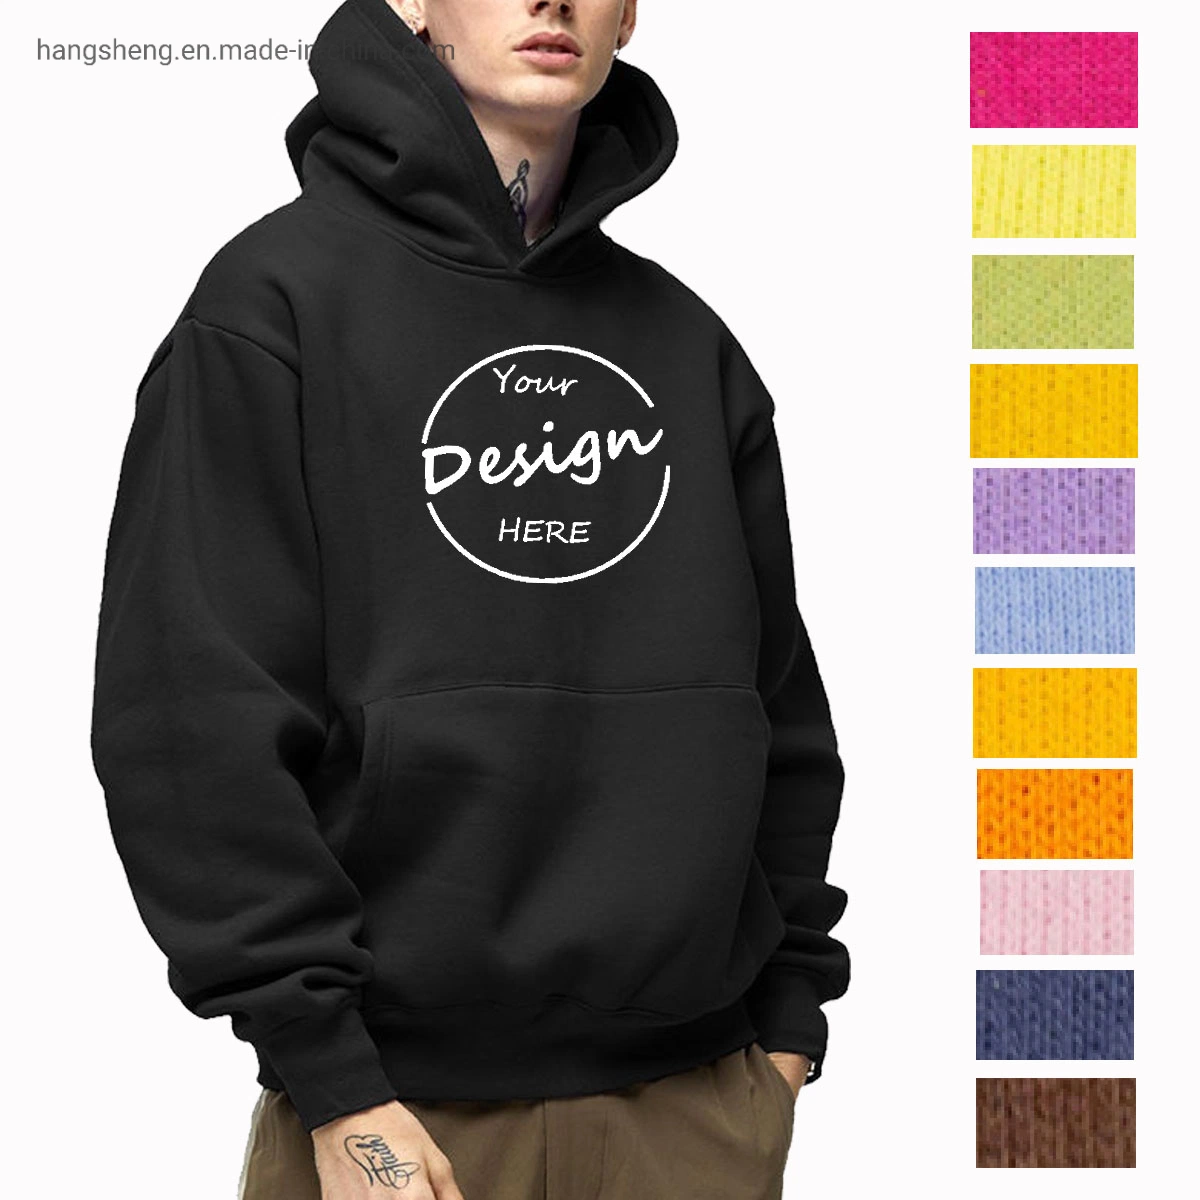 Custom High quality/High cost performance  Soft Cotton Fleece Hoody Puff Print Plain Oversized Heavyweight 480GSM Hoodies Men with Private Label